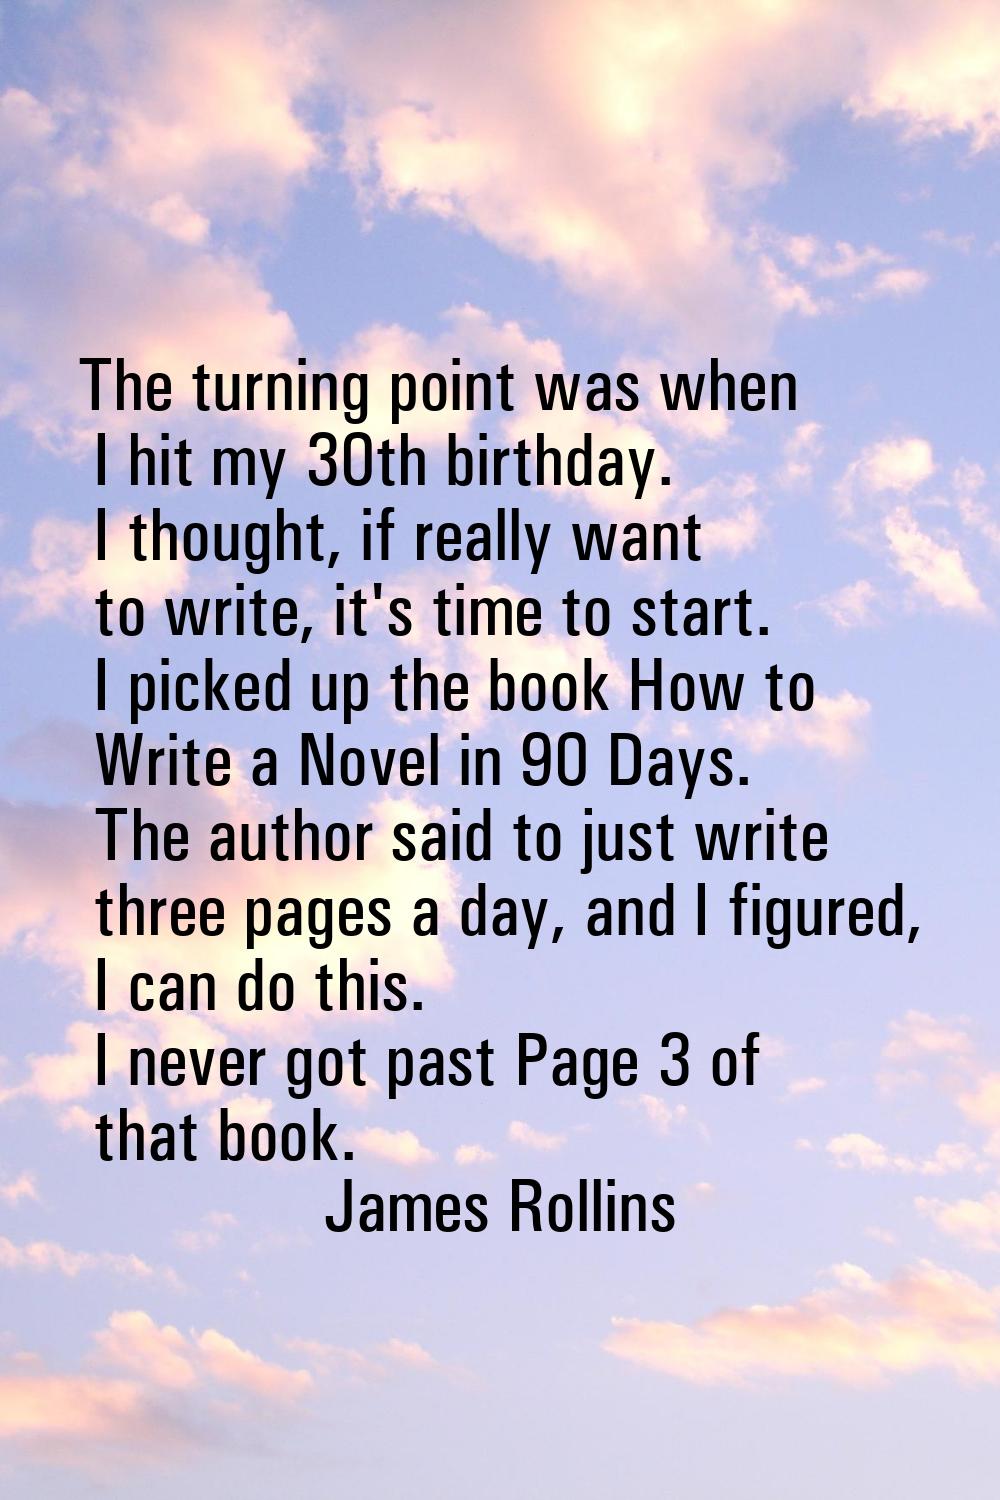 The turning point was when I hit my 30th birthday. I thought, if really want to write, it's time to